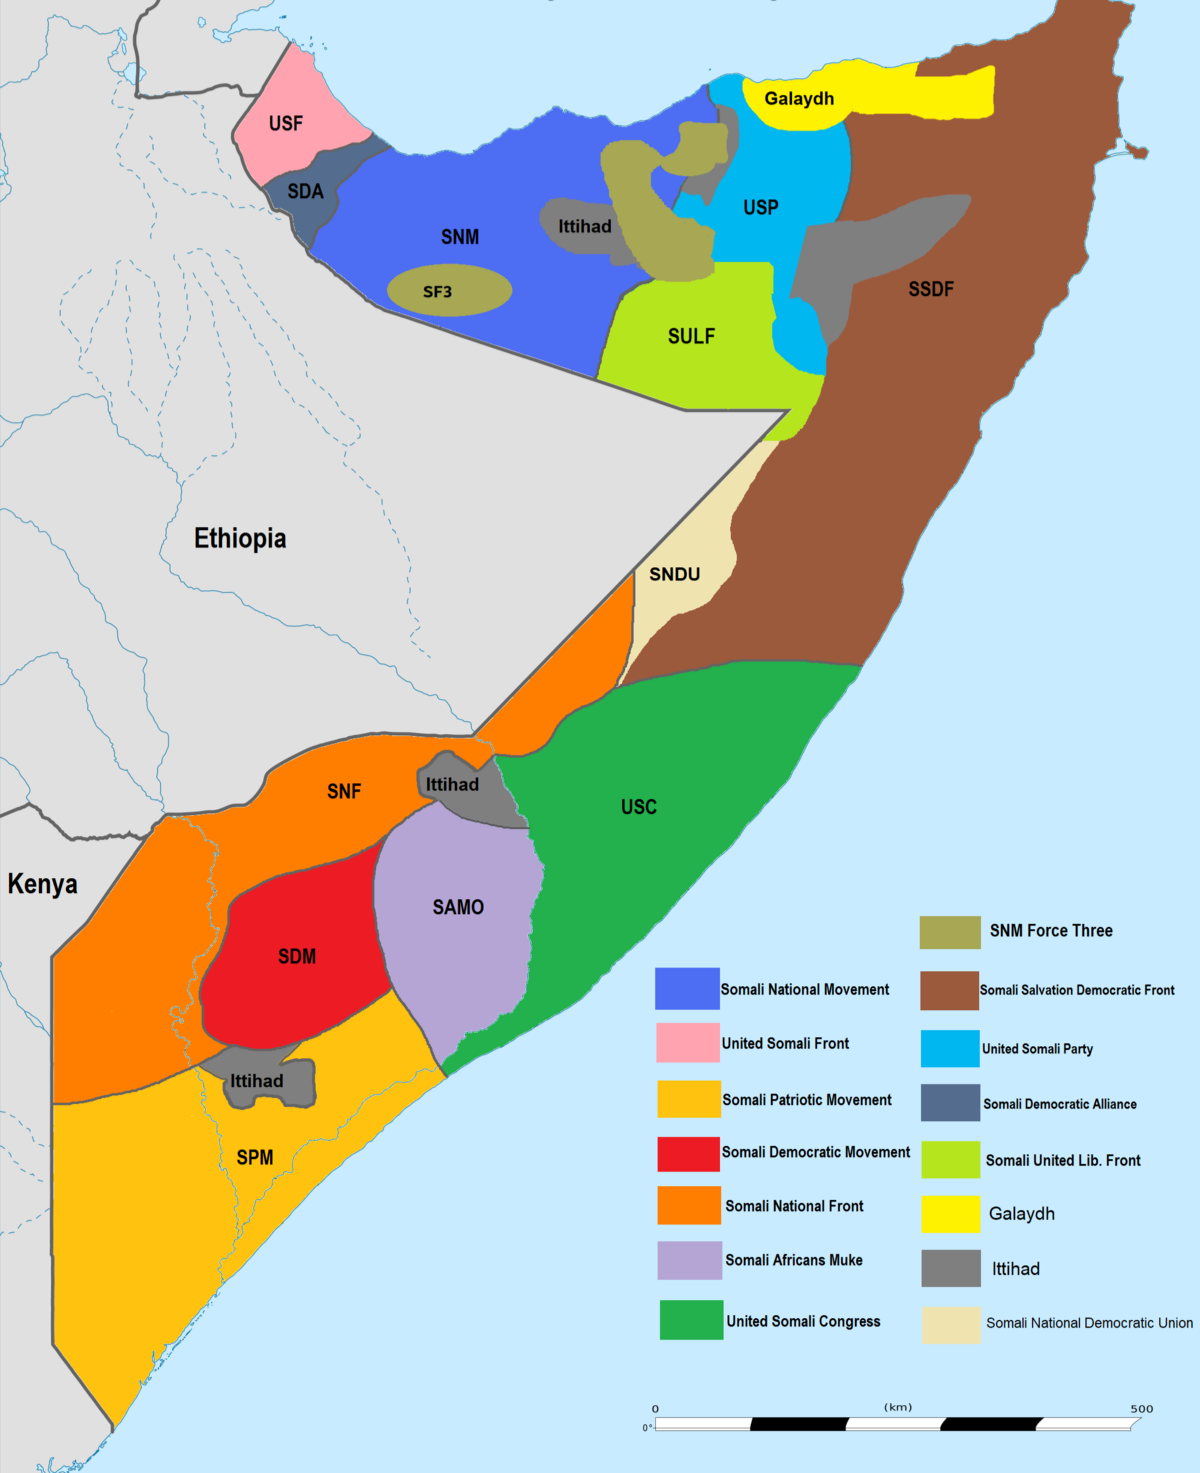 Situation_a_year_after_1991_fall_of_Somalia's_central_government.png